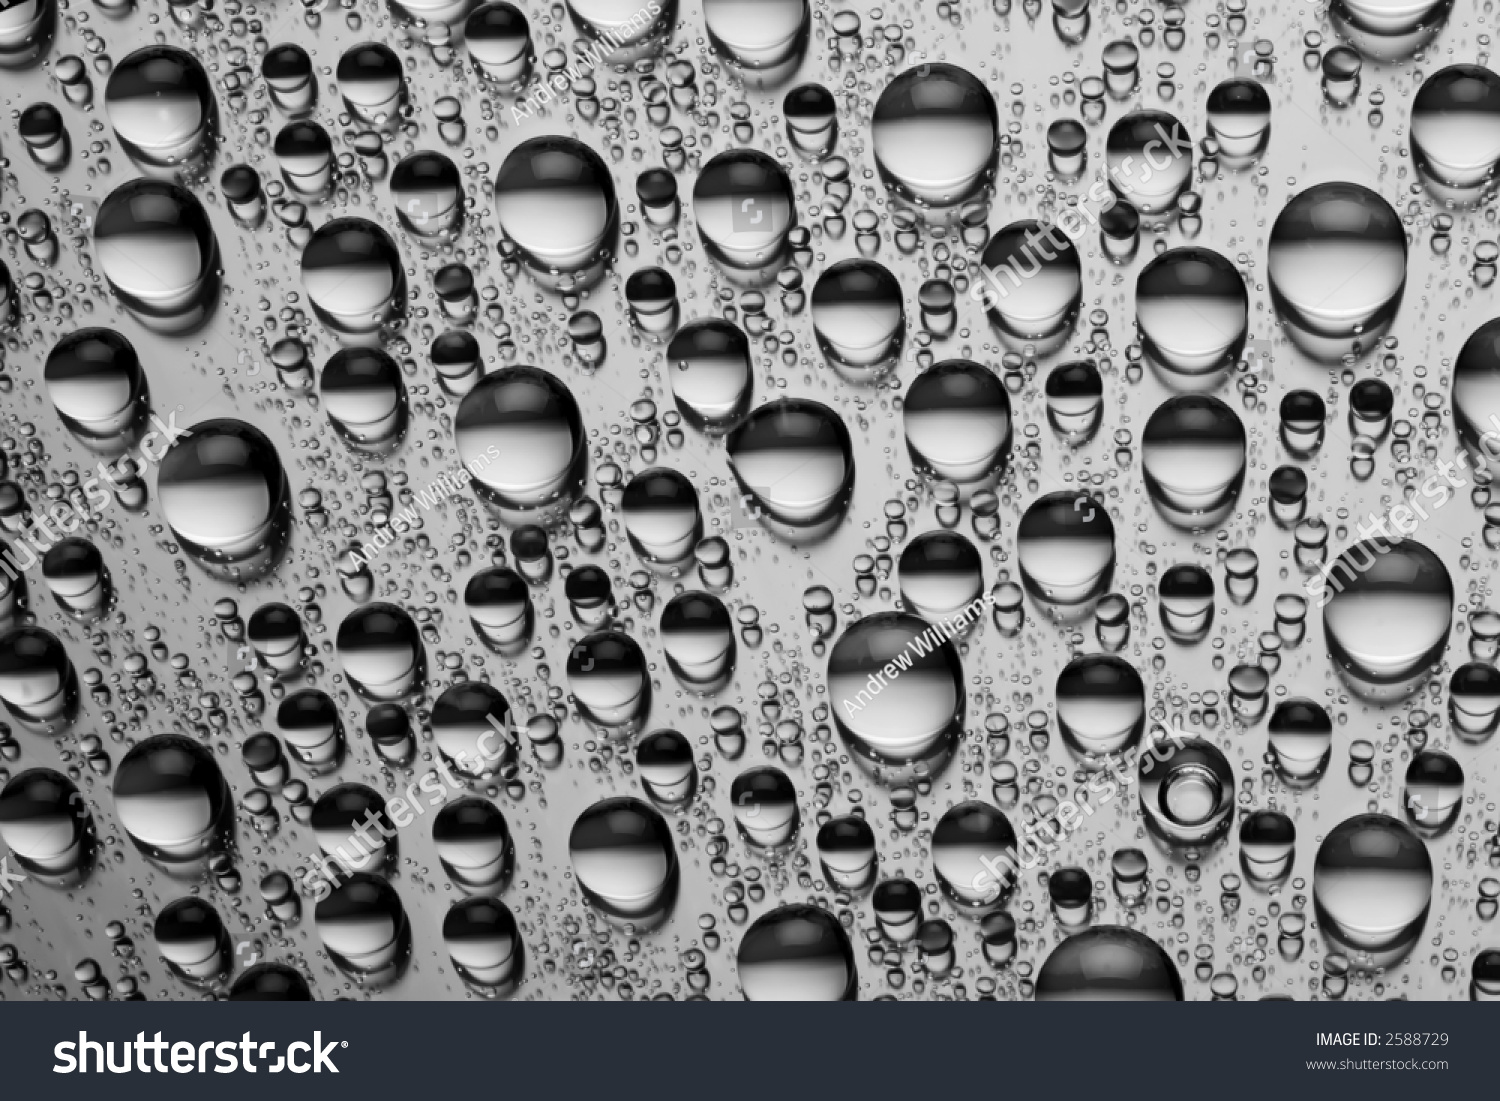 Black And White Photo Of Water Drops On A Metallic Surface - 2588729 ...